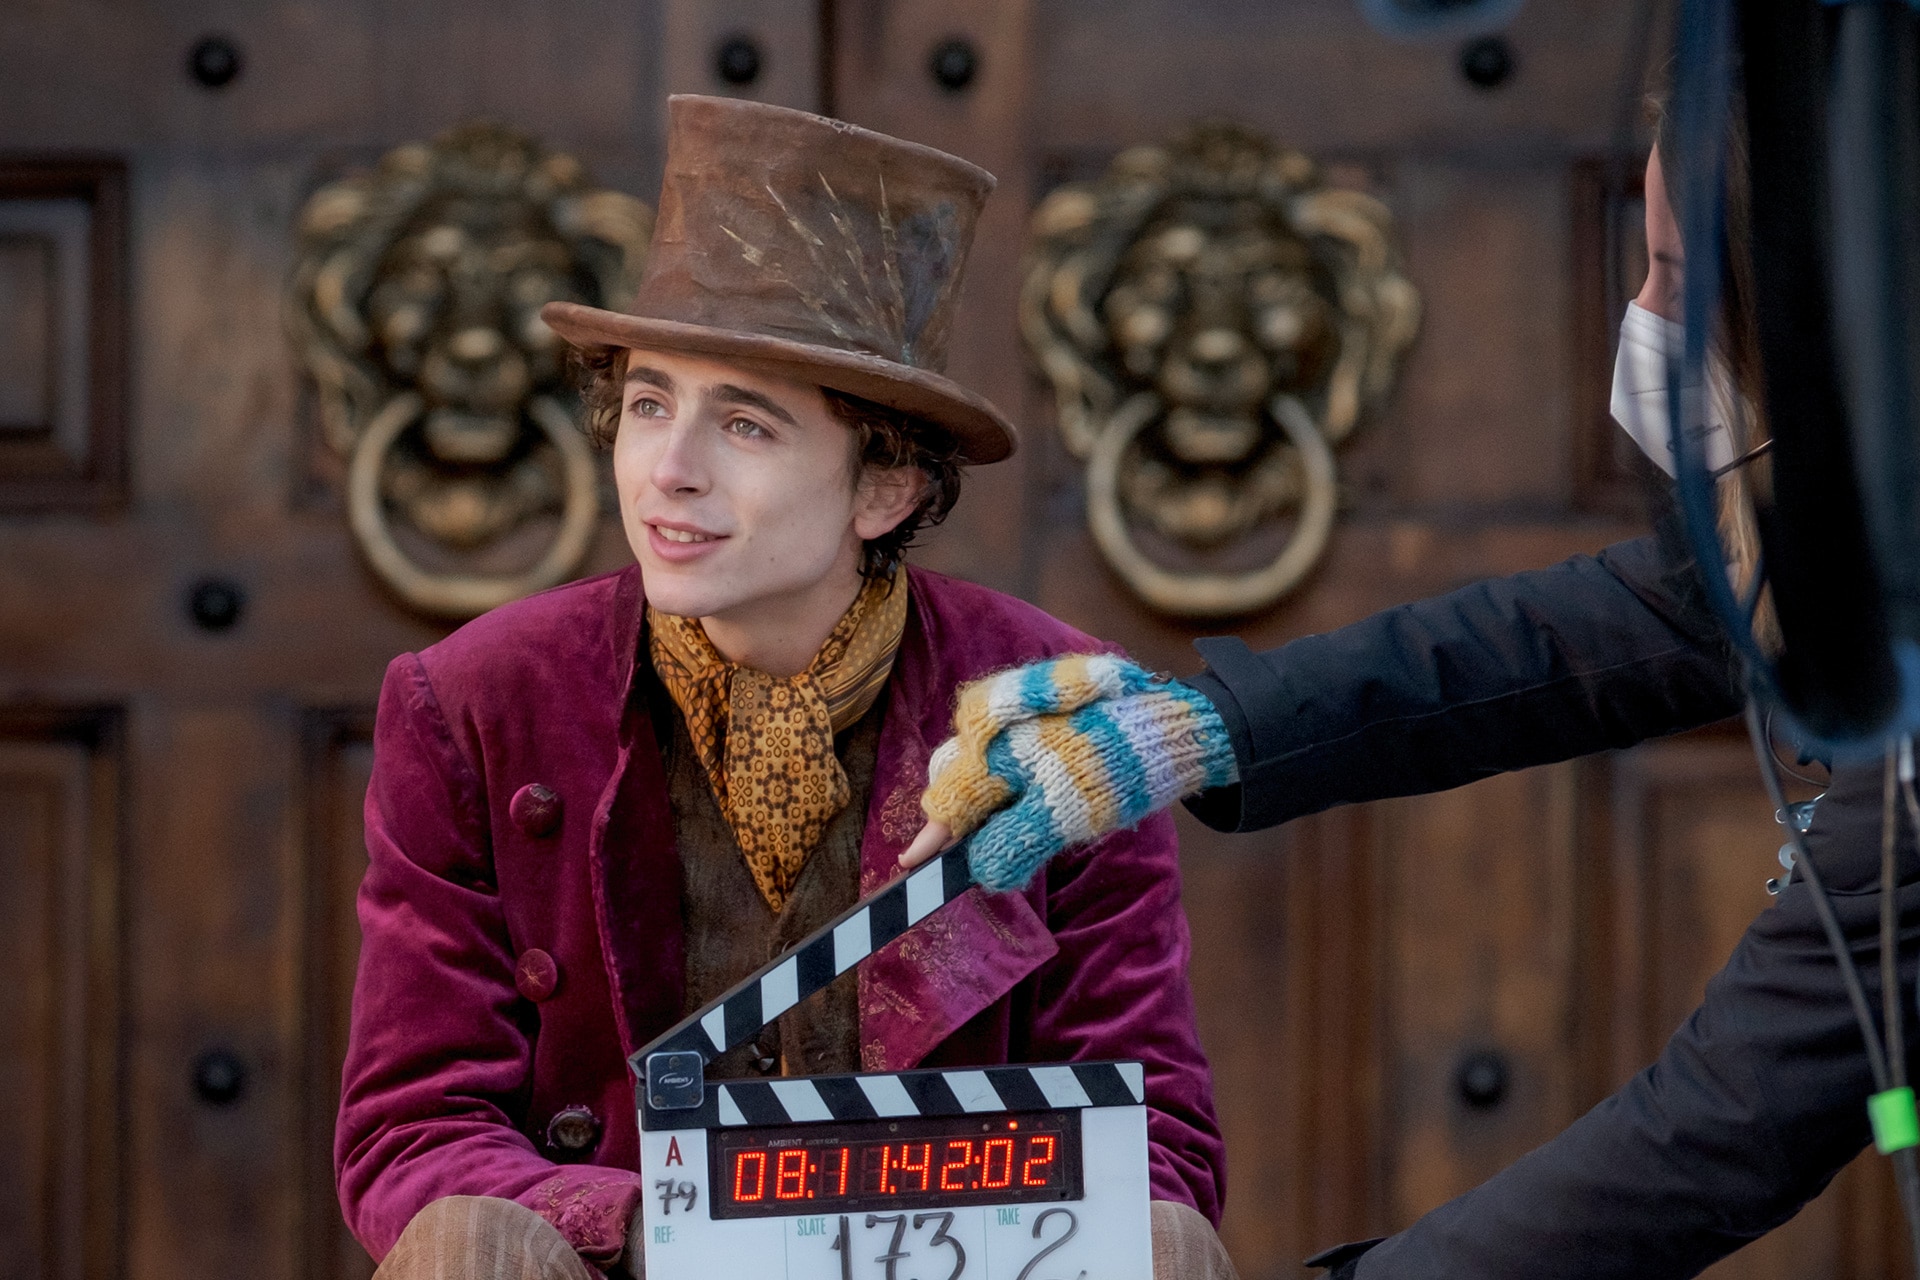 Behind the scenes, Timothée Chalamet, in costume as Willy Wonka, sits on stone steps in front of large wood doors. A boom mic is overhead and a crewperson holds a clapper board that reads, "Slate: 173, Take: 2, Wonka, 3.11.21, Director: Paul King." 